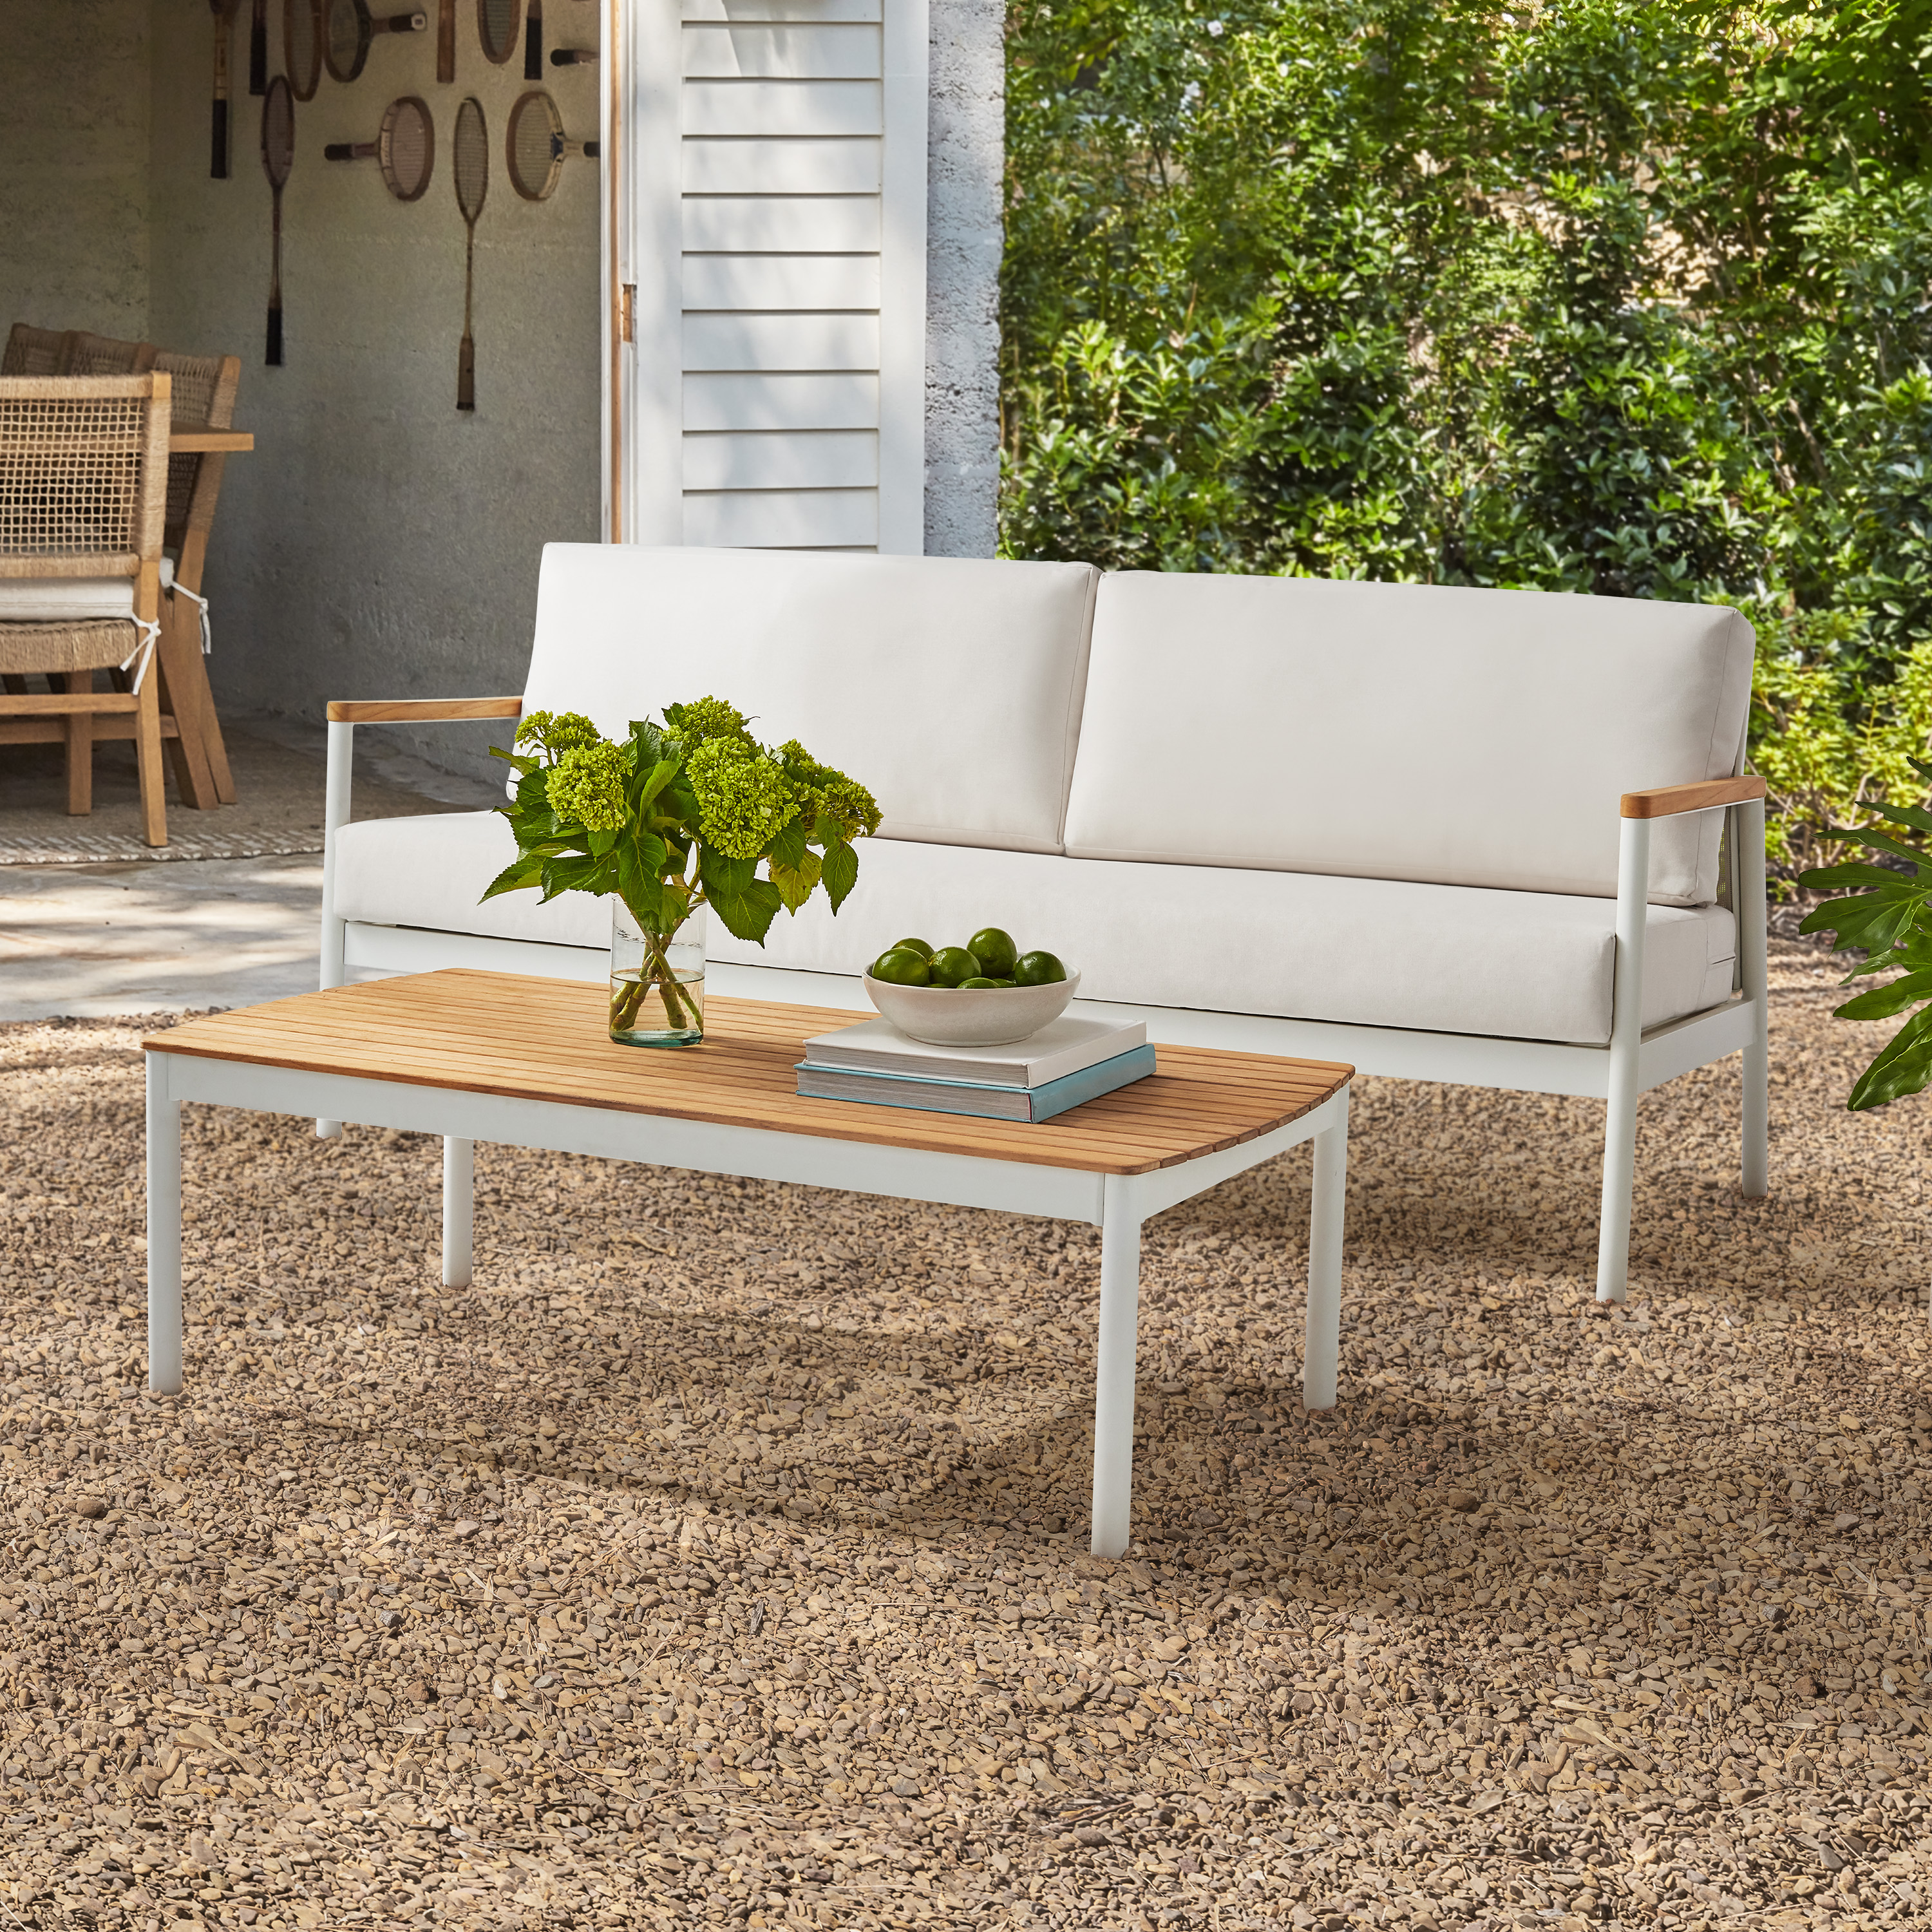 Better Homes & Gardens Wellsley 2-Piece Aluminum Outdoor Sofa & Table Set by Dave & Jenny Marrs - image 2 of 9